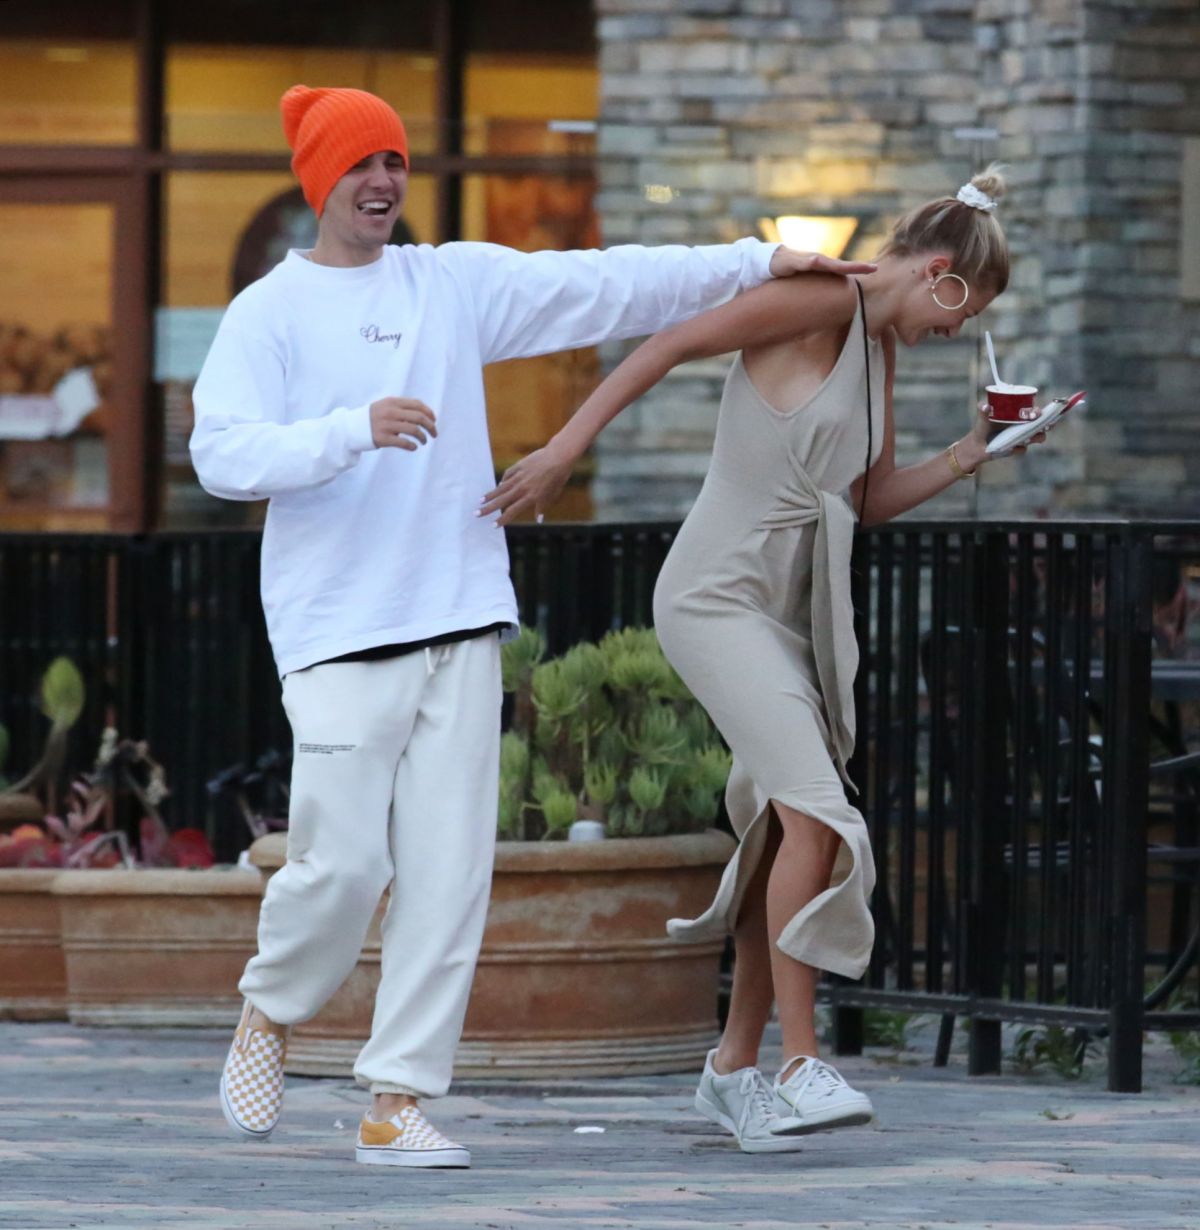 hailey-and-justin-bieber-out-in-los-angeles-03-30-2019-2.jpg